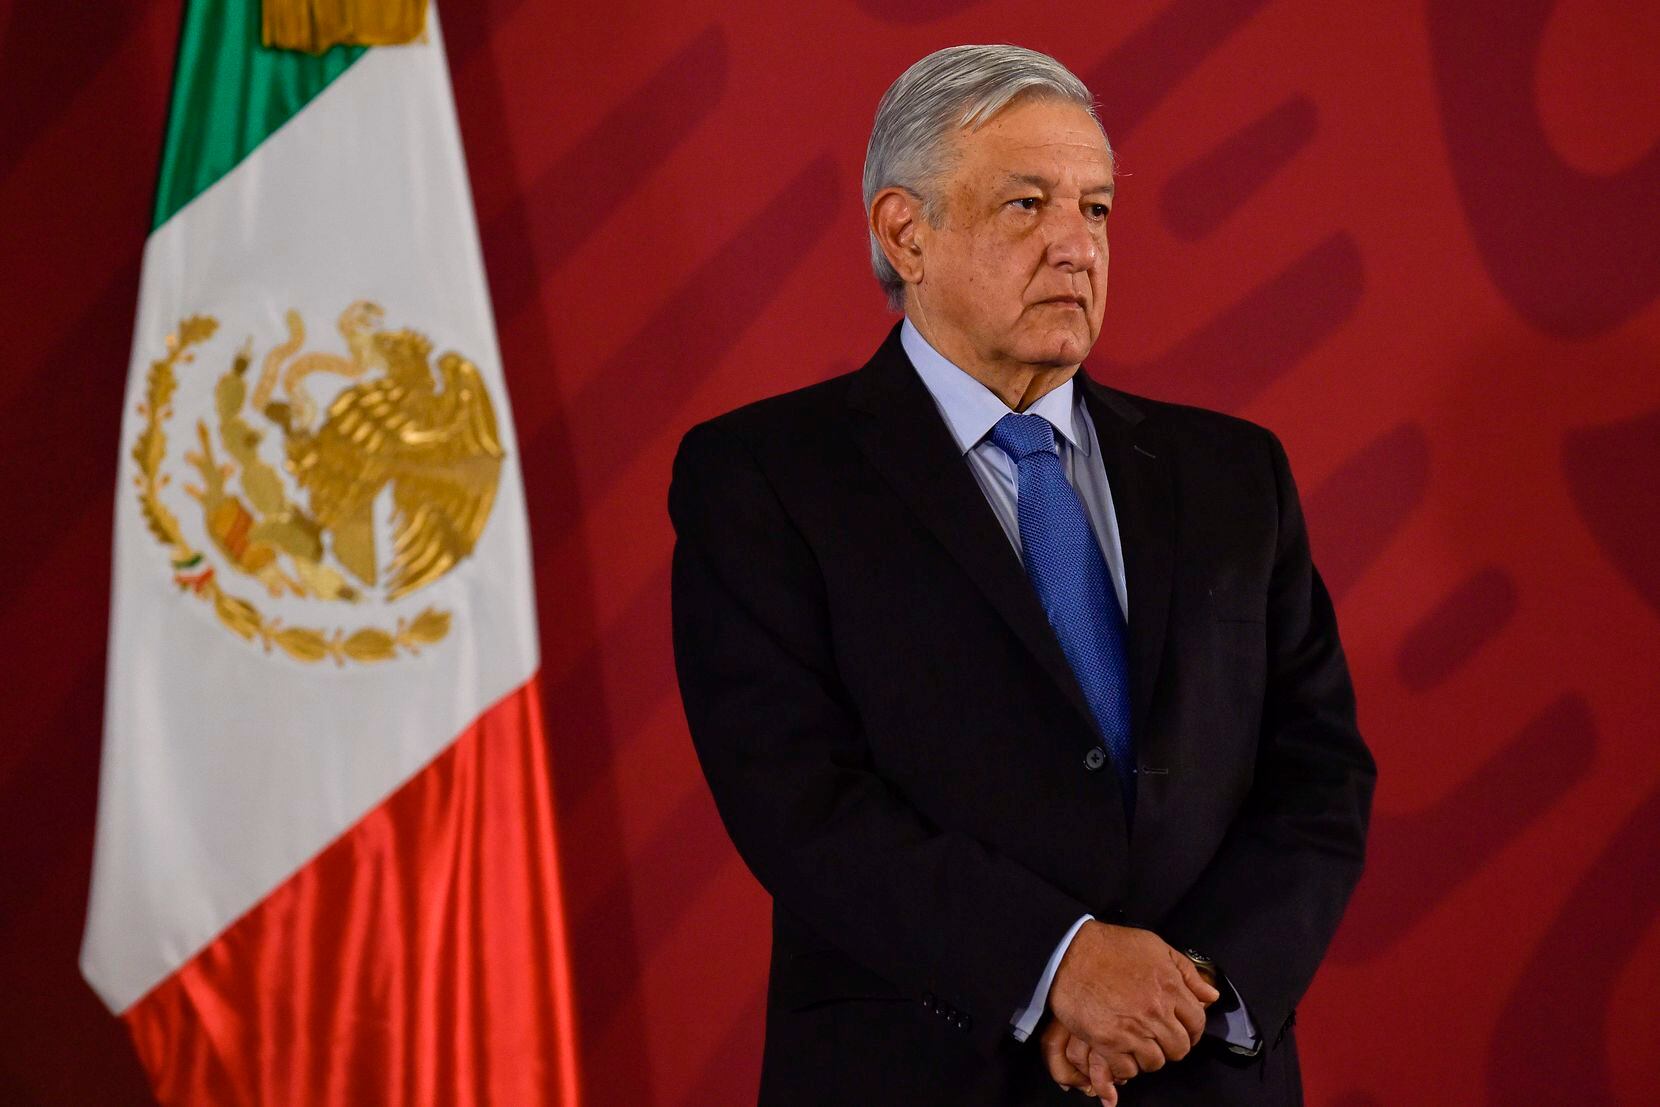 One of the proposals of Mexican President Andres Manuel Lopez Obrador's campaign was to...